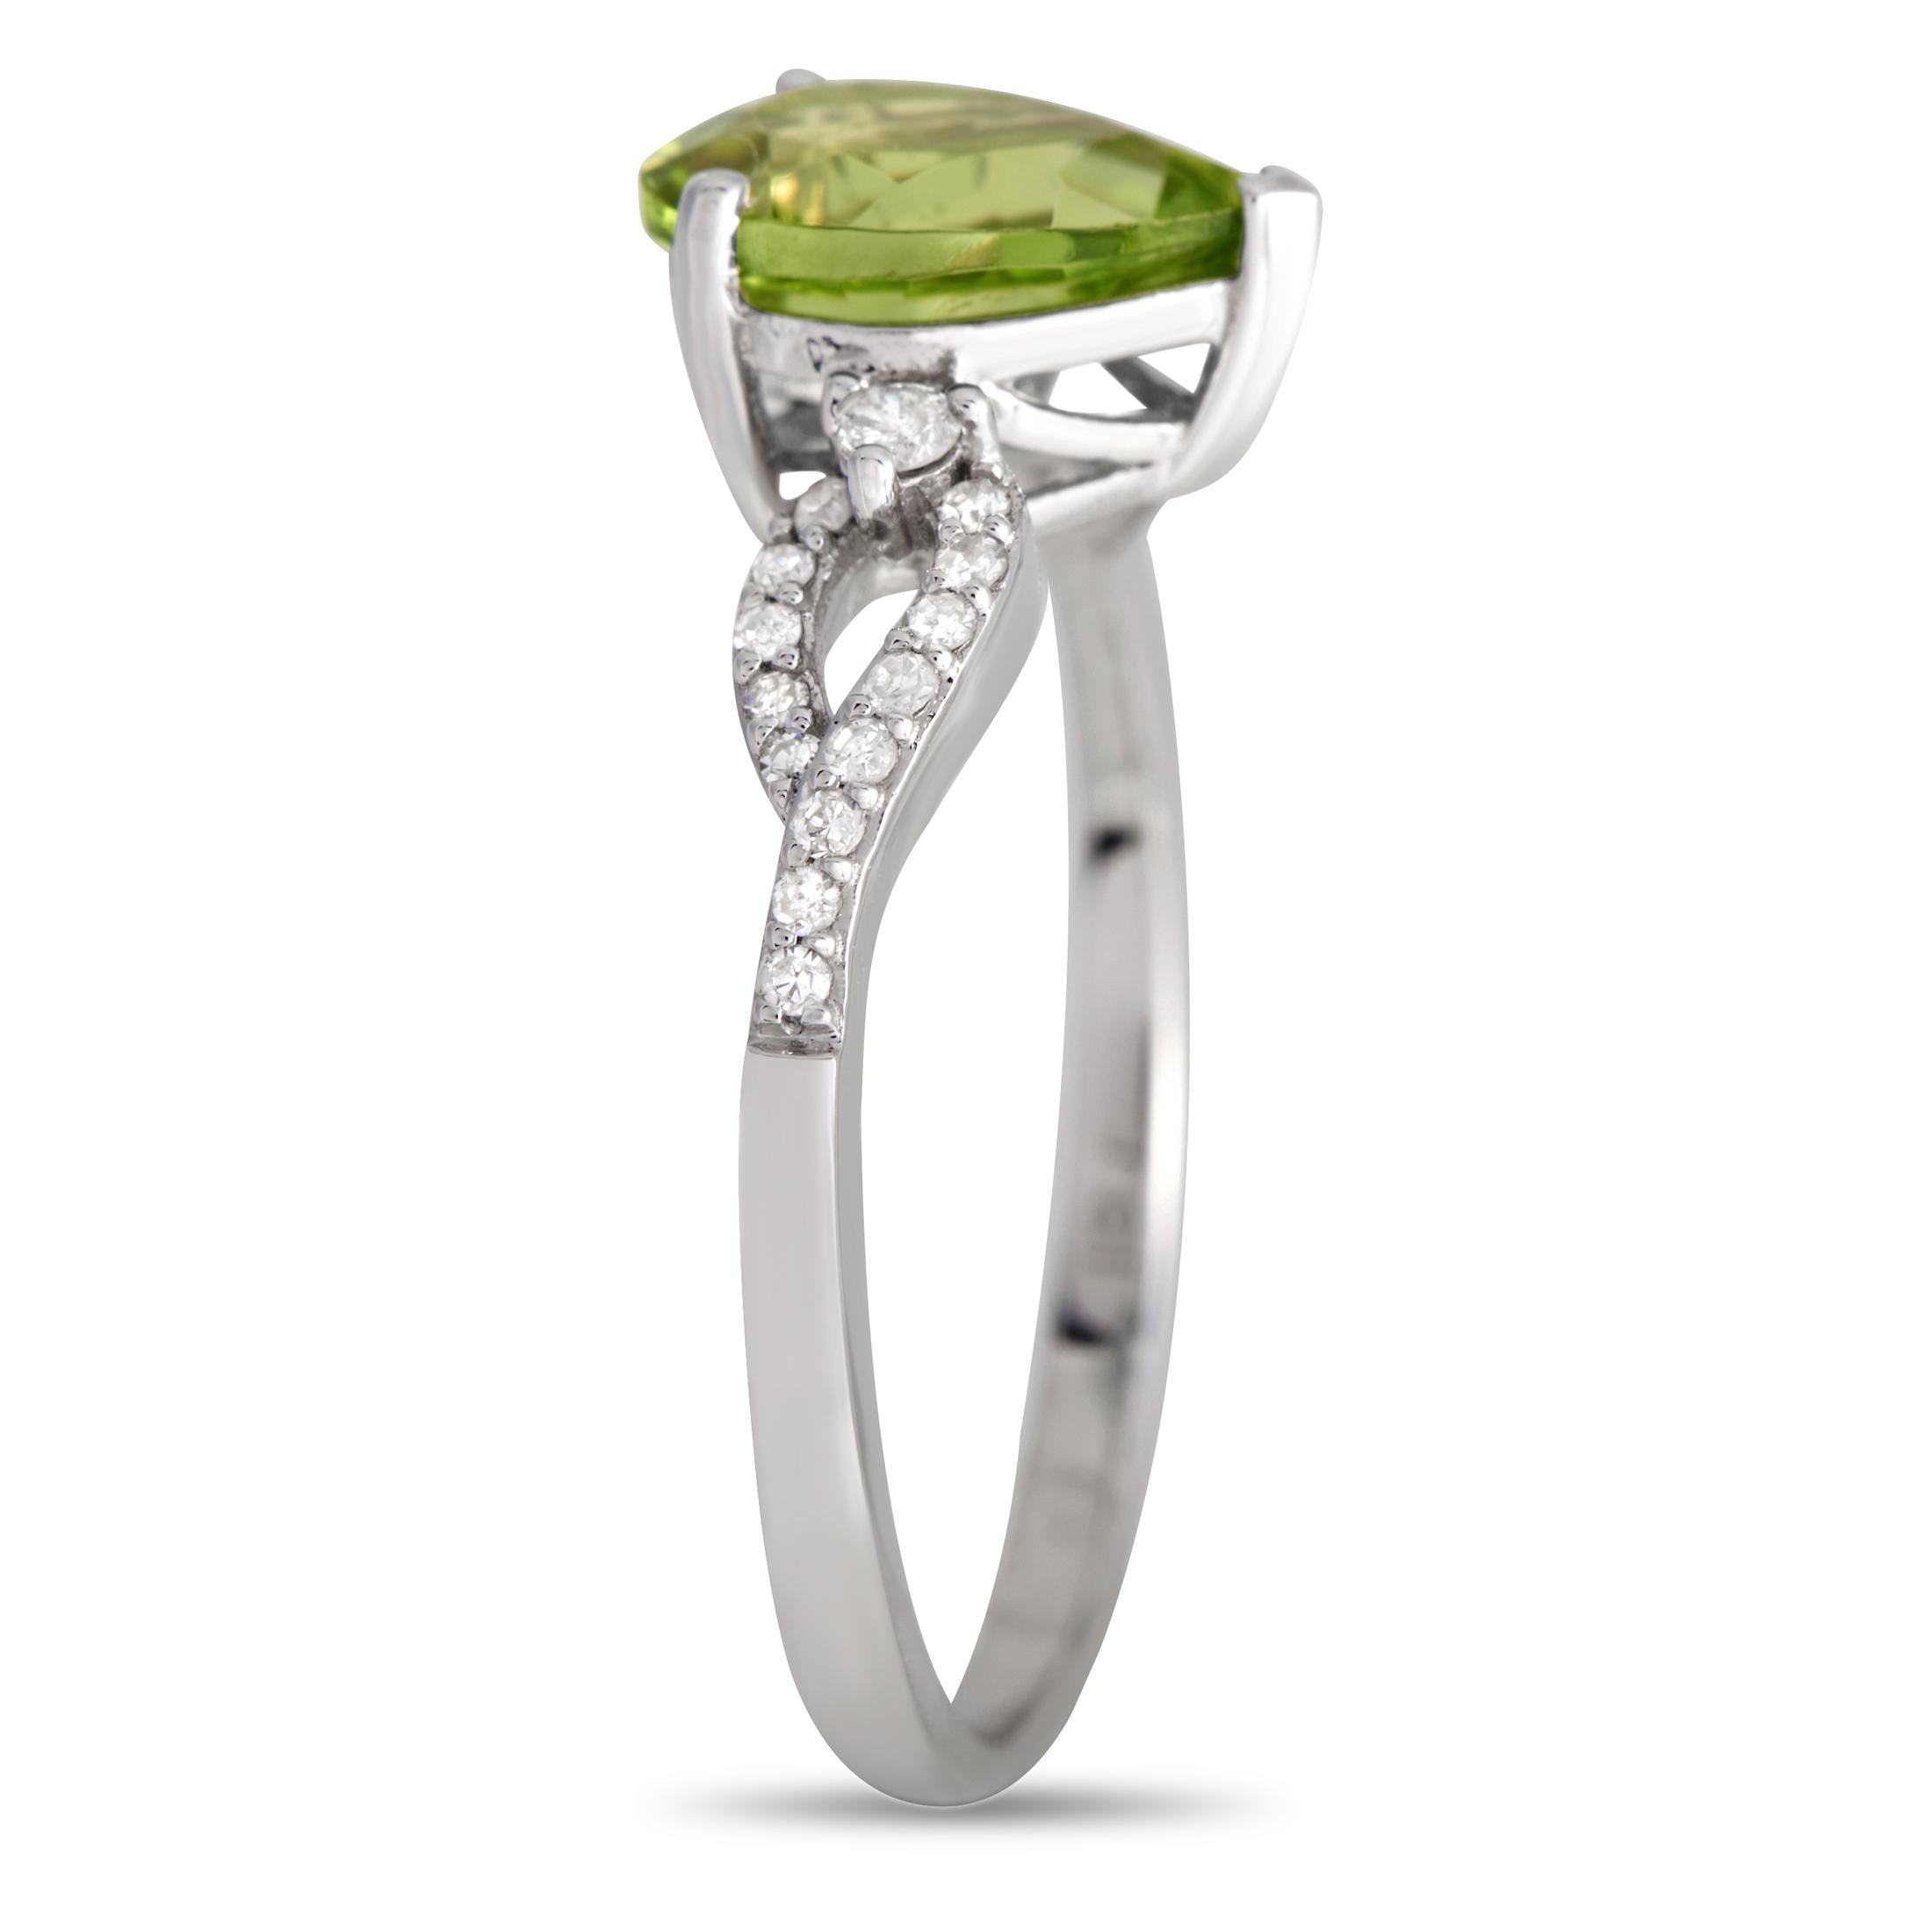 A captivating pear-shaped Peridot center stone is beautifully showcased by this rings intricate 14K White Gold setting. This piece features a 2mm wide band, a 6mm top height, and Diamond accents with a total weight of 0.15 carats.This jewelry piece